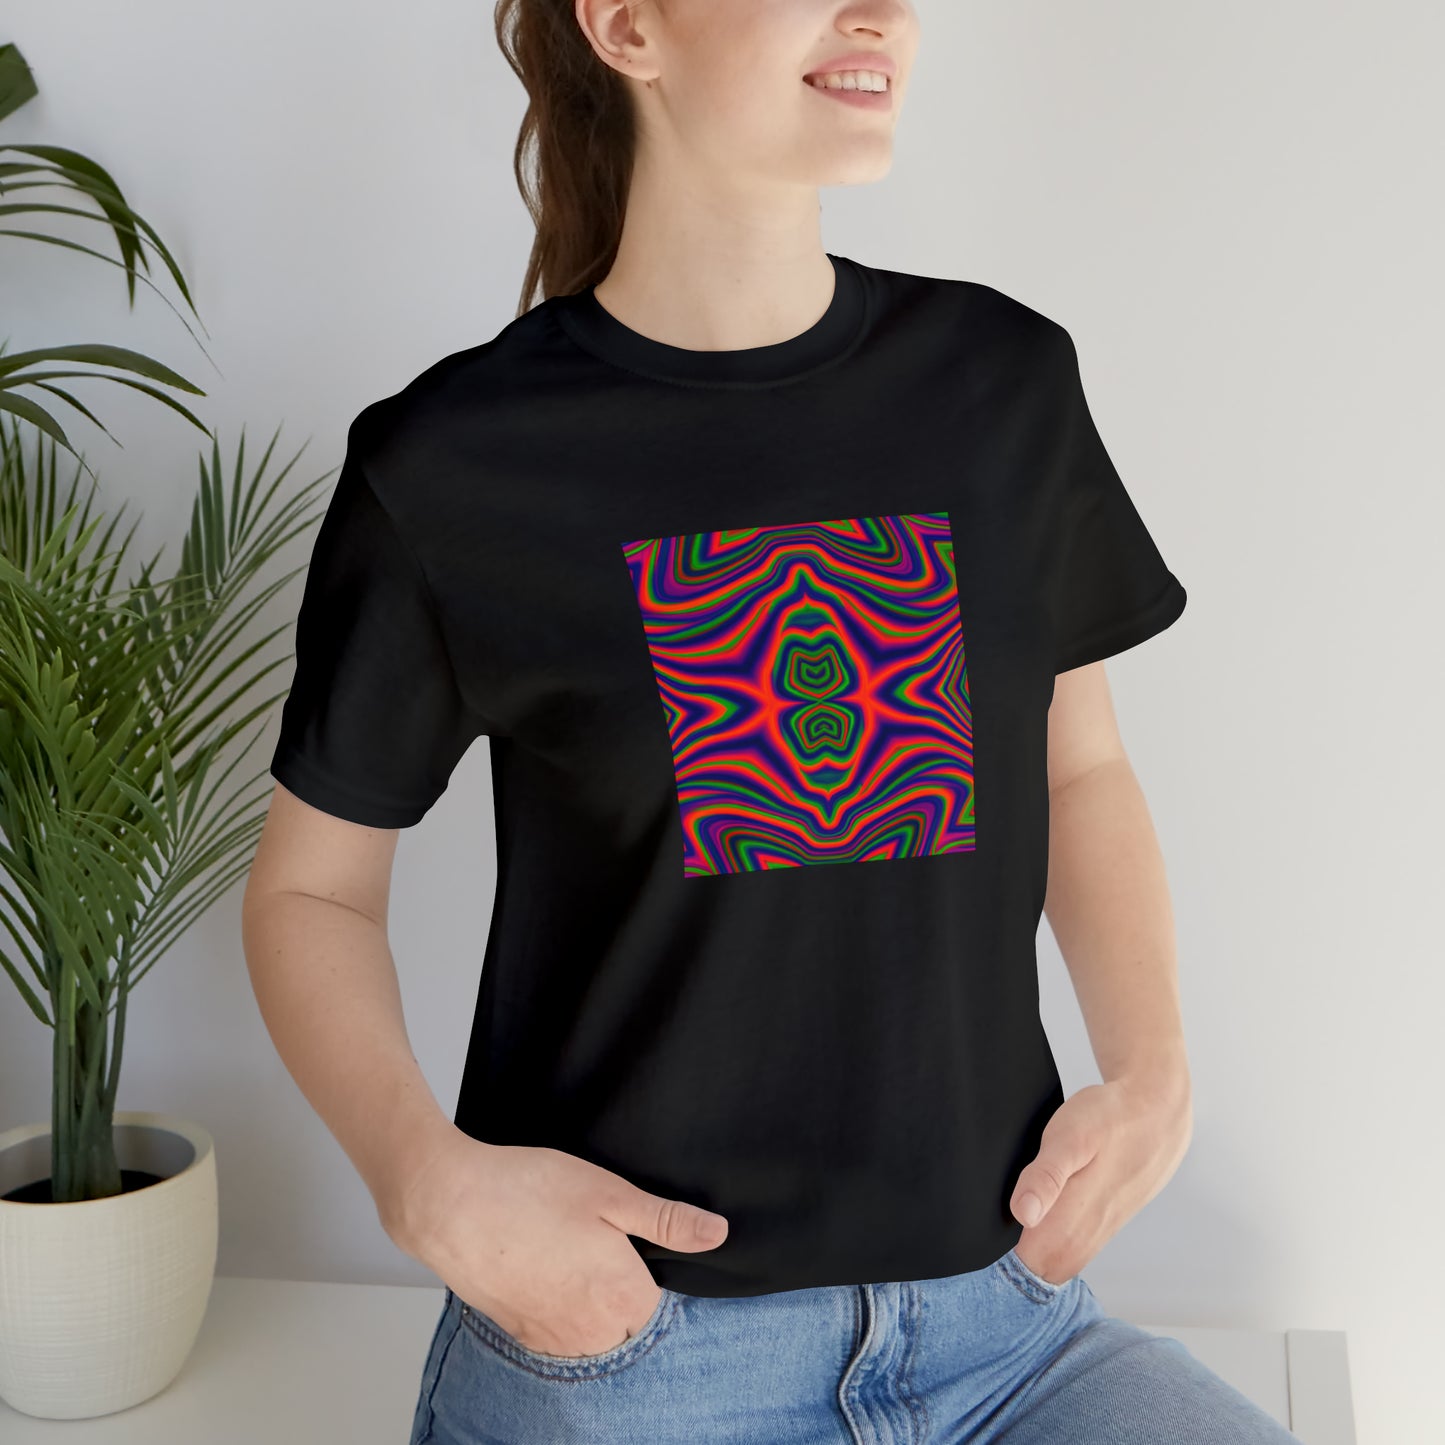 Nora Fourteen - - Psychedelic Trippy Pattern Tee Shirt